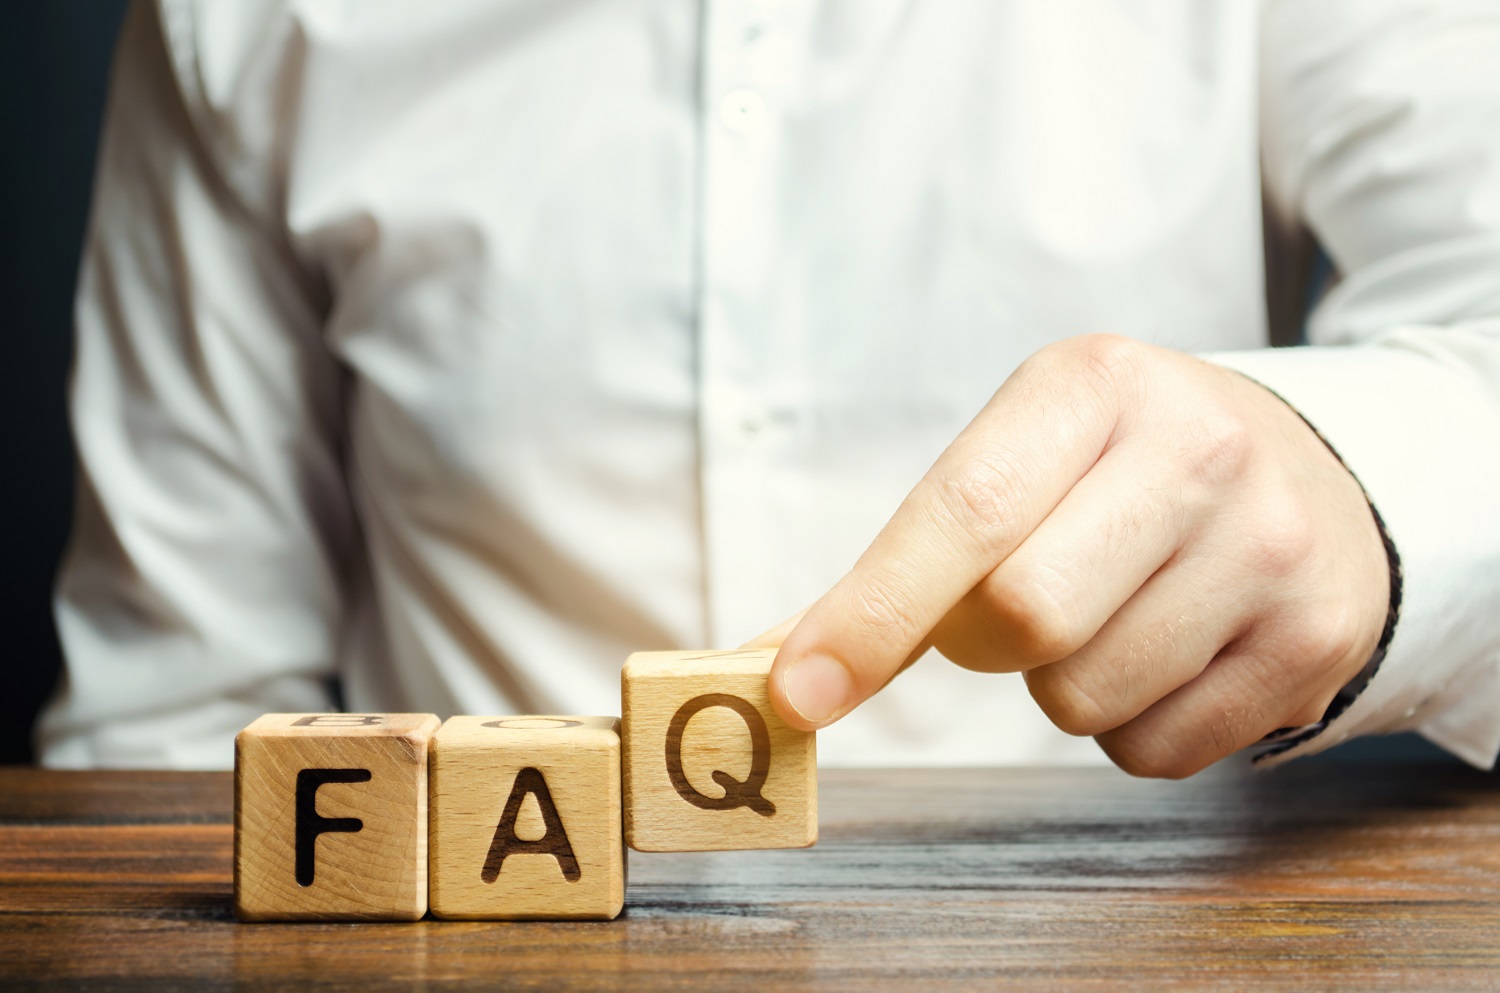 FAQ - Frequently Asked Questions about Hair Transplant Treatment